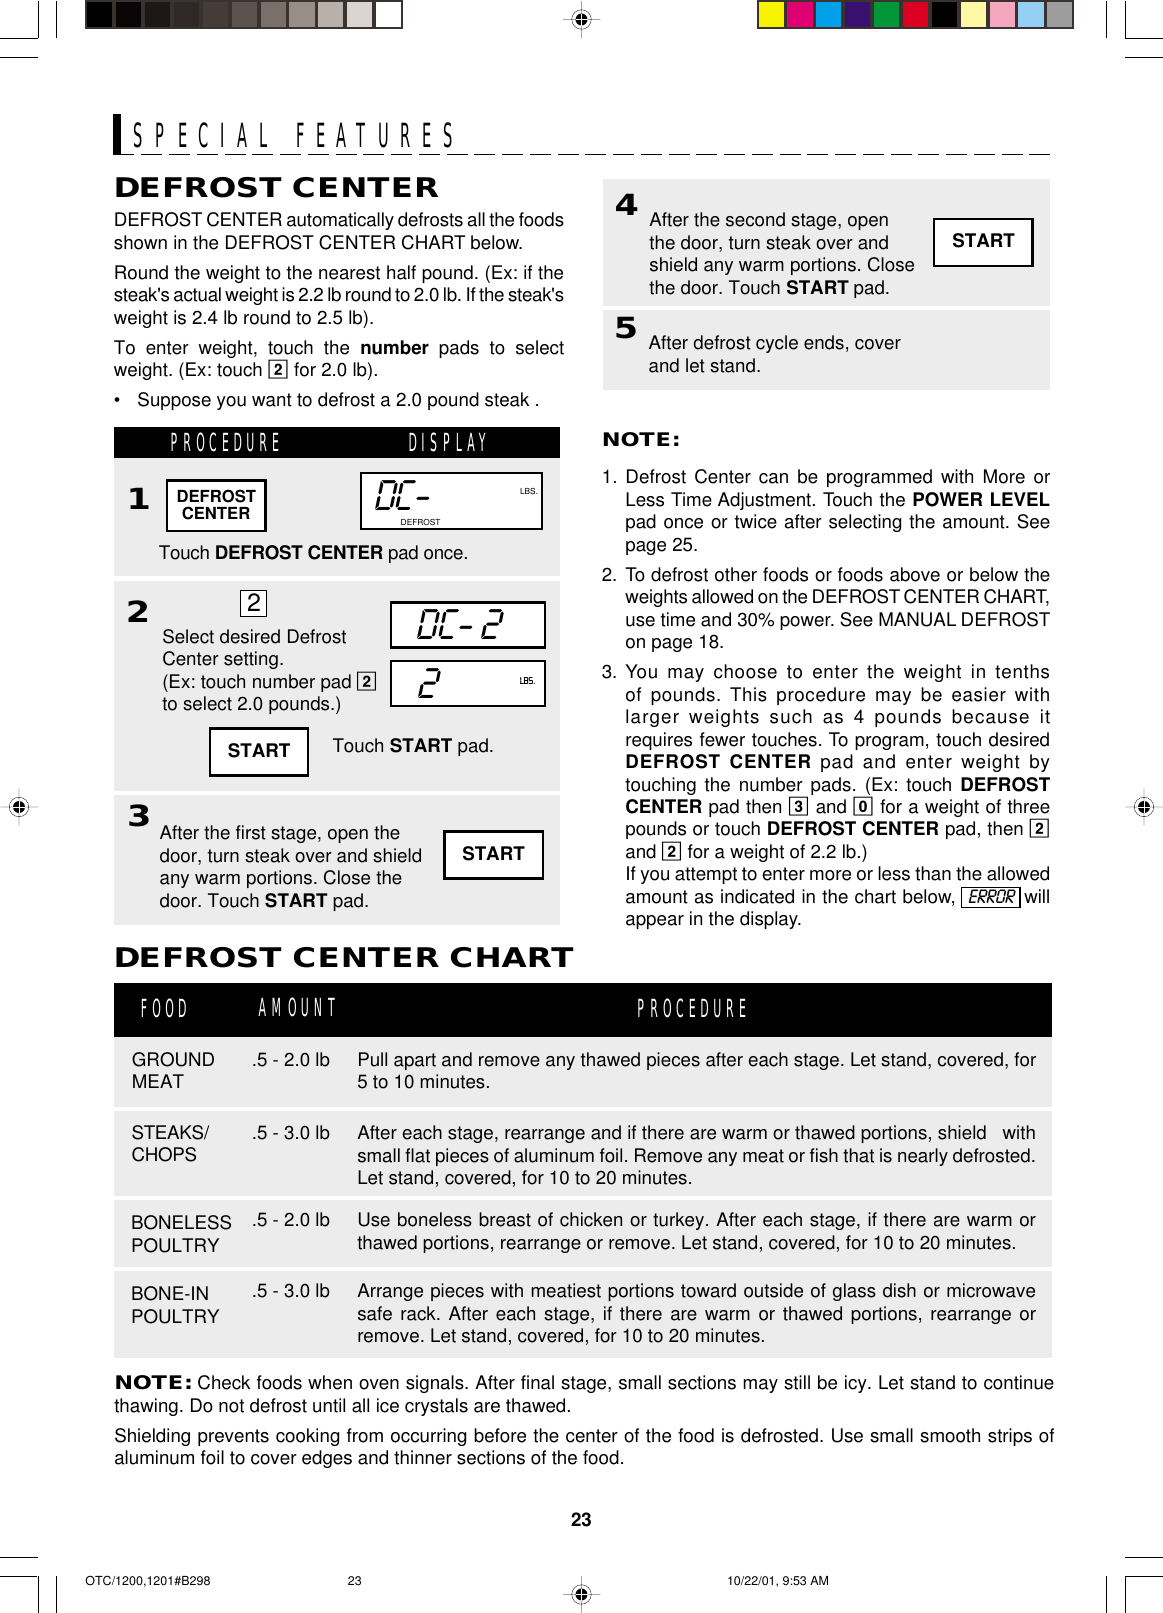 23DEFROST CENTERDEFROST CENTER automatically defrosts all the foodsshown in the DEFROST CENTER CHART below.Round the weight to the nearest half pound. (Ex: if thesteak&apos;s actual weight is 2.2 lb round to 2.0 lb. If the steak&apos;sweight is 2.4 lb round to 2.5 lb).To enter weight, touch the number pads to selectweight. (Ex: touch 2 for 2.0 lb).•Suppose you want to defrost a 2.0 pound steak .PROCEDURE DISPLAY1Touch DEFROST CENTER pad once.2NOTE:1. Defrost Center can be programmed with More orLess Time Adjustment. Touch the POWER LEVELpad once or twice after selecting the amount. Seepage 25.2. To defrost other foods or foods above or below theweights allowed on the DEFROST CENTER CHART,use time and 30% power. See MANUAL DEFROSTon page 18.3. You may choose to enter the weight in tenthsof pounds. This procedure may be easier withlarger weights such as 4 pounds because itrequires fewer touches. To program, touch desiredDEFROST CENTER pad and enter weight bytouching the number pads. (Ex: touch DEFROSTCENTER pad then 3 and 0 for a weight of threepounds or touch DEFROST CENTER pad, then 2and 2 for a weight of 2.2 lb.)If you attempt to enter more or less than the allowedamount as indicated in the chart below,  ERROR  willappear in the display.After the first stage, open thedoor, turn steak over and shieldany warm portions. Close thedoor. Touch START pad.NOTE: Check foods when oven signals. After final stage, small sections may still be icy. Let stand to continuethawing. Do not defrost until all ice crystals are thawed.Shielding prevents cooking from occurring before the center of the food is defrosted. Use small smooth strips ofaluminum foil to cover edges and thinner sections of the food.DEFROST CENTER CHARTGROUNDMEATFOOD PROCEDUREBONELESSPOULTRY.5 - 2.0 lb.5 - 2.0 lbSTEAKS/CHOPS .5 - 3.0 lbDC-NO.LBS.CUPSOZ.COOK DEFROSTTouch START pad.AMOUNT3DEFROSTCENTERBONE-INPOULTRY.5 - 3.0 lbPull apart and remove any thawed pieces after each stage. Let stand, covered, for5 to 10 minutes.After each stage, rearrange and if there are warm or thawed portions, shield   withsmall flat pieces of aluminum foil. Remove any meat or fish that is nearly defrosted.Let stand, covered, for 10 to 20 minutes.Use boneless breast of chicken or turkey. After each stage, if there are warm orthawed portions, rearrange or remove. Let stand, covered, for 10 to 20 minutes.Arrange pieces with meatiest portions toward outside of glass dish or microwavesafe rack. After each stage, if there are warm or thawed portions, rearrange orremove. Let stand, covered, for 10 to 20 minutes.SPECIAL FEATURESSTARTSelect desired DefrostCenter setting.(Ex: touch number pad 2to select 2.0 pounds.)DC- 22LBS.24STARTAfter the second stage, openthe door, turn steak over andshield any warm portions. Closethe door. Touch START pad.START5After defrost cycle ends, coverand let stand.OTC/1200,1201#B298 10/22/01, 9:53 AM23